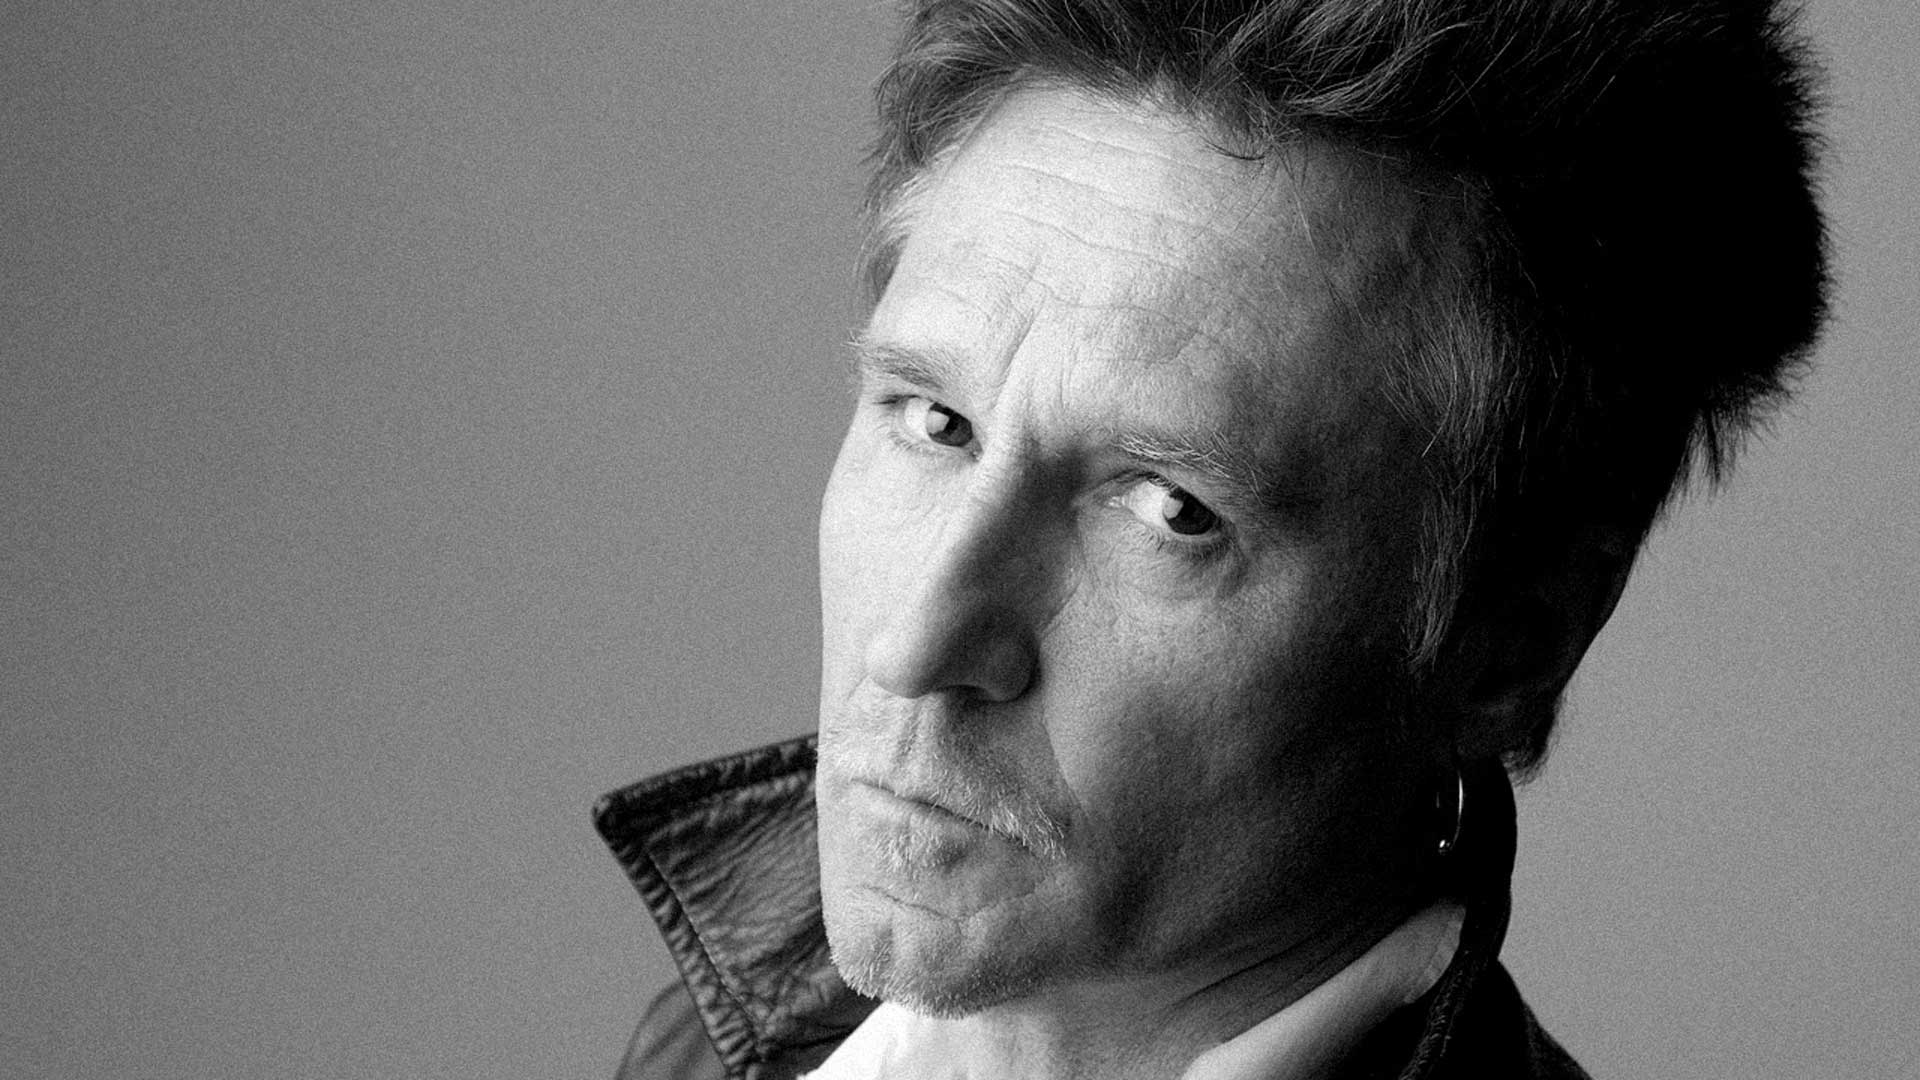 Musician John Waite is best known for the 1984 hit single "Missing You", which reached No. 1 on the US Billboard Hot 100 and the top ten on the UK Singles Chart.